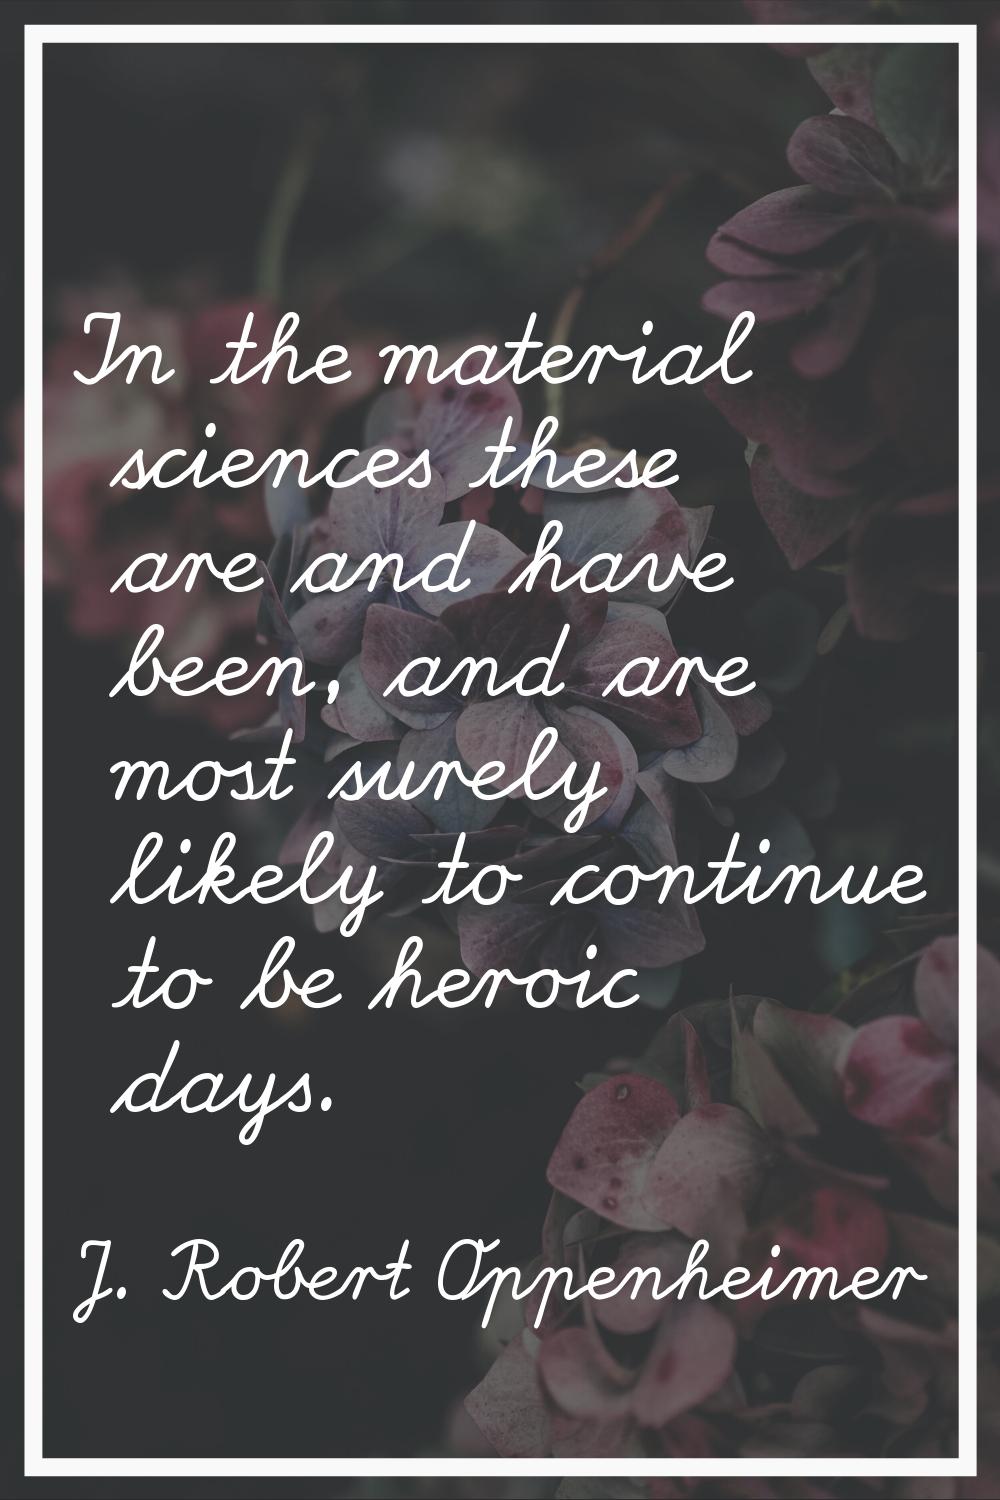 In the material sciences these are and have been, and are most surely likely to continue to be hero